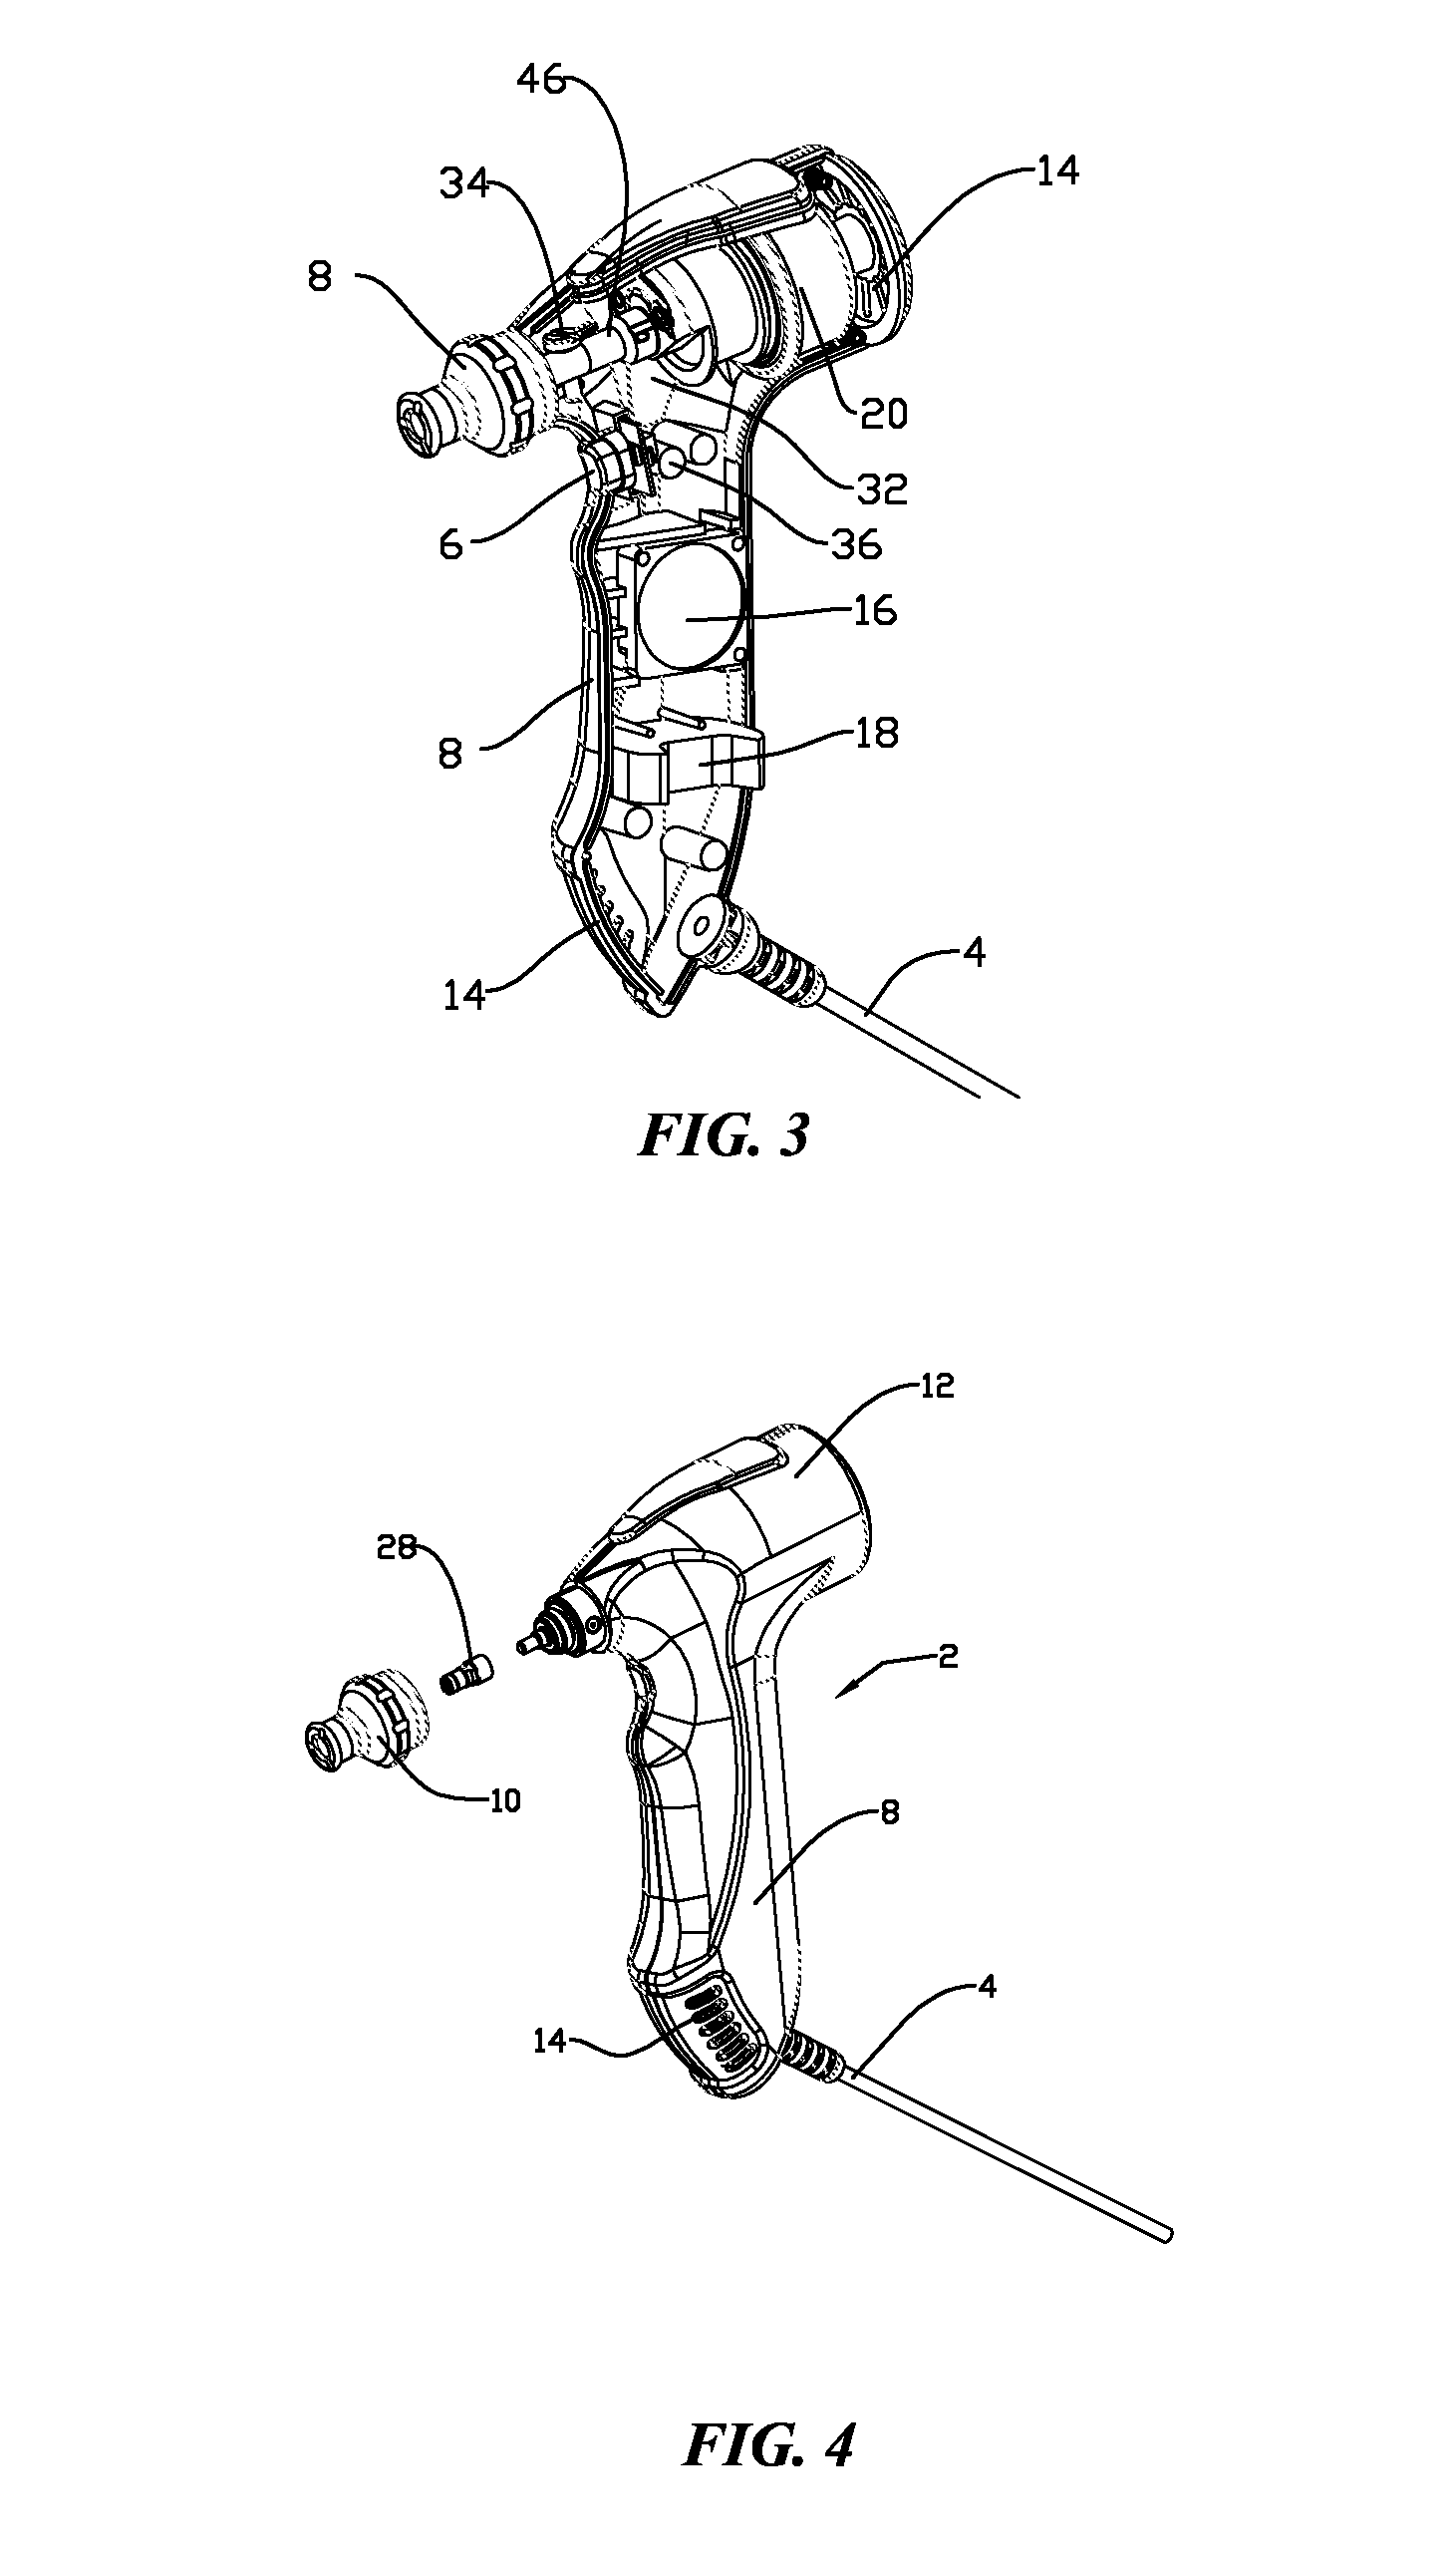 Probe for obtaining bioelectrical signals